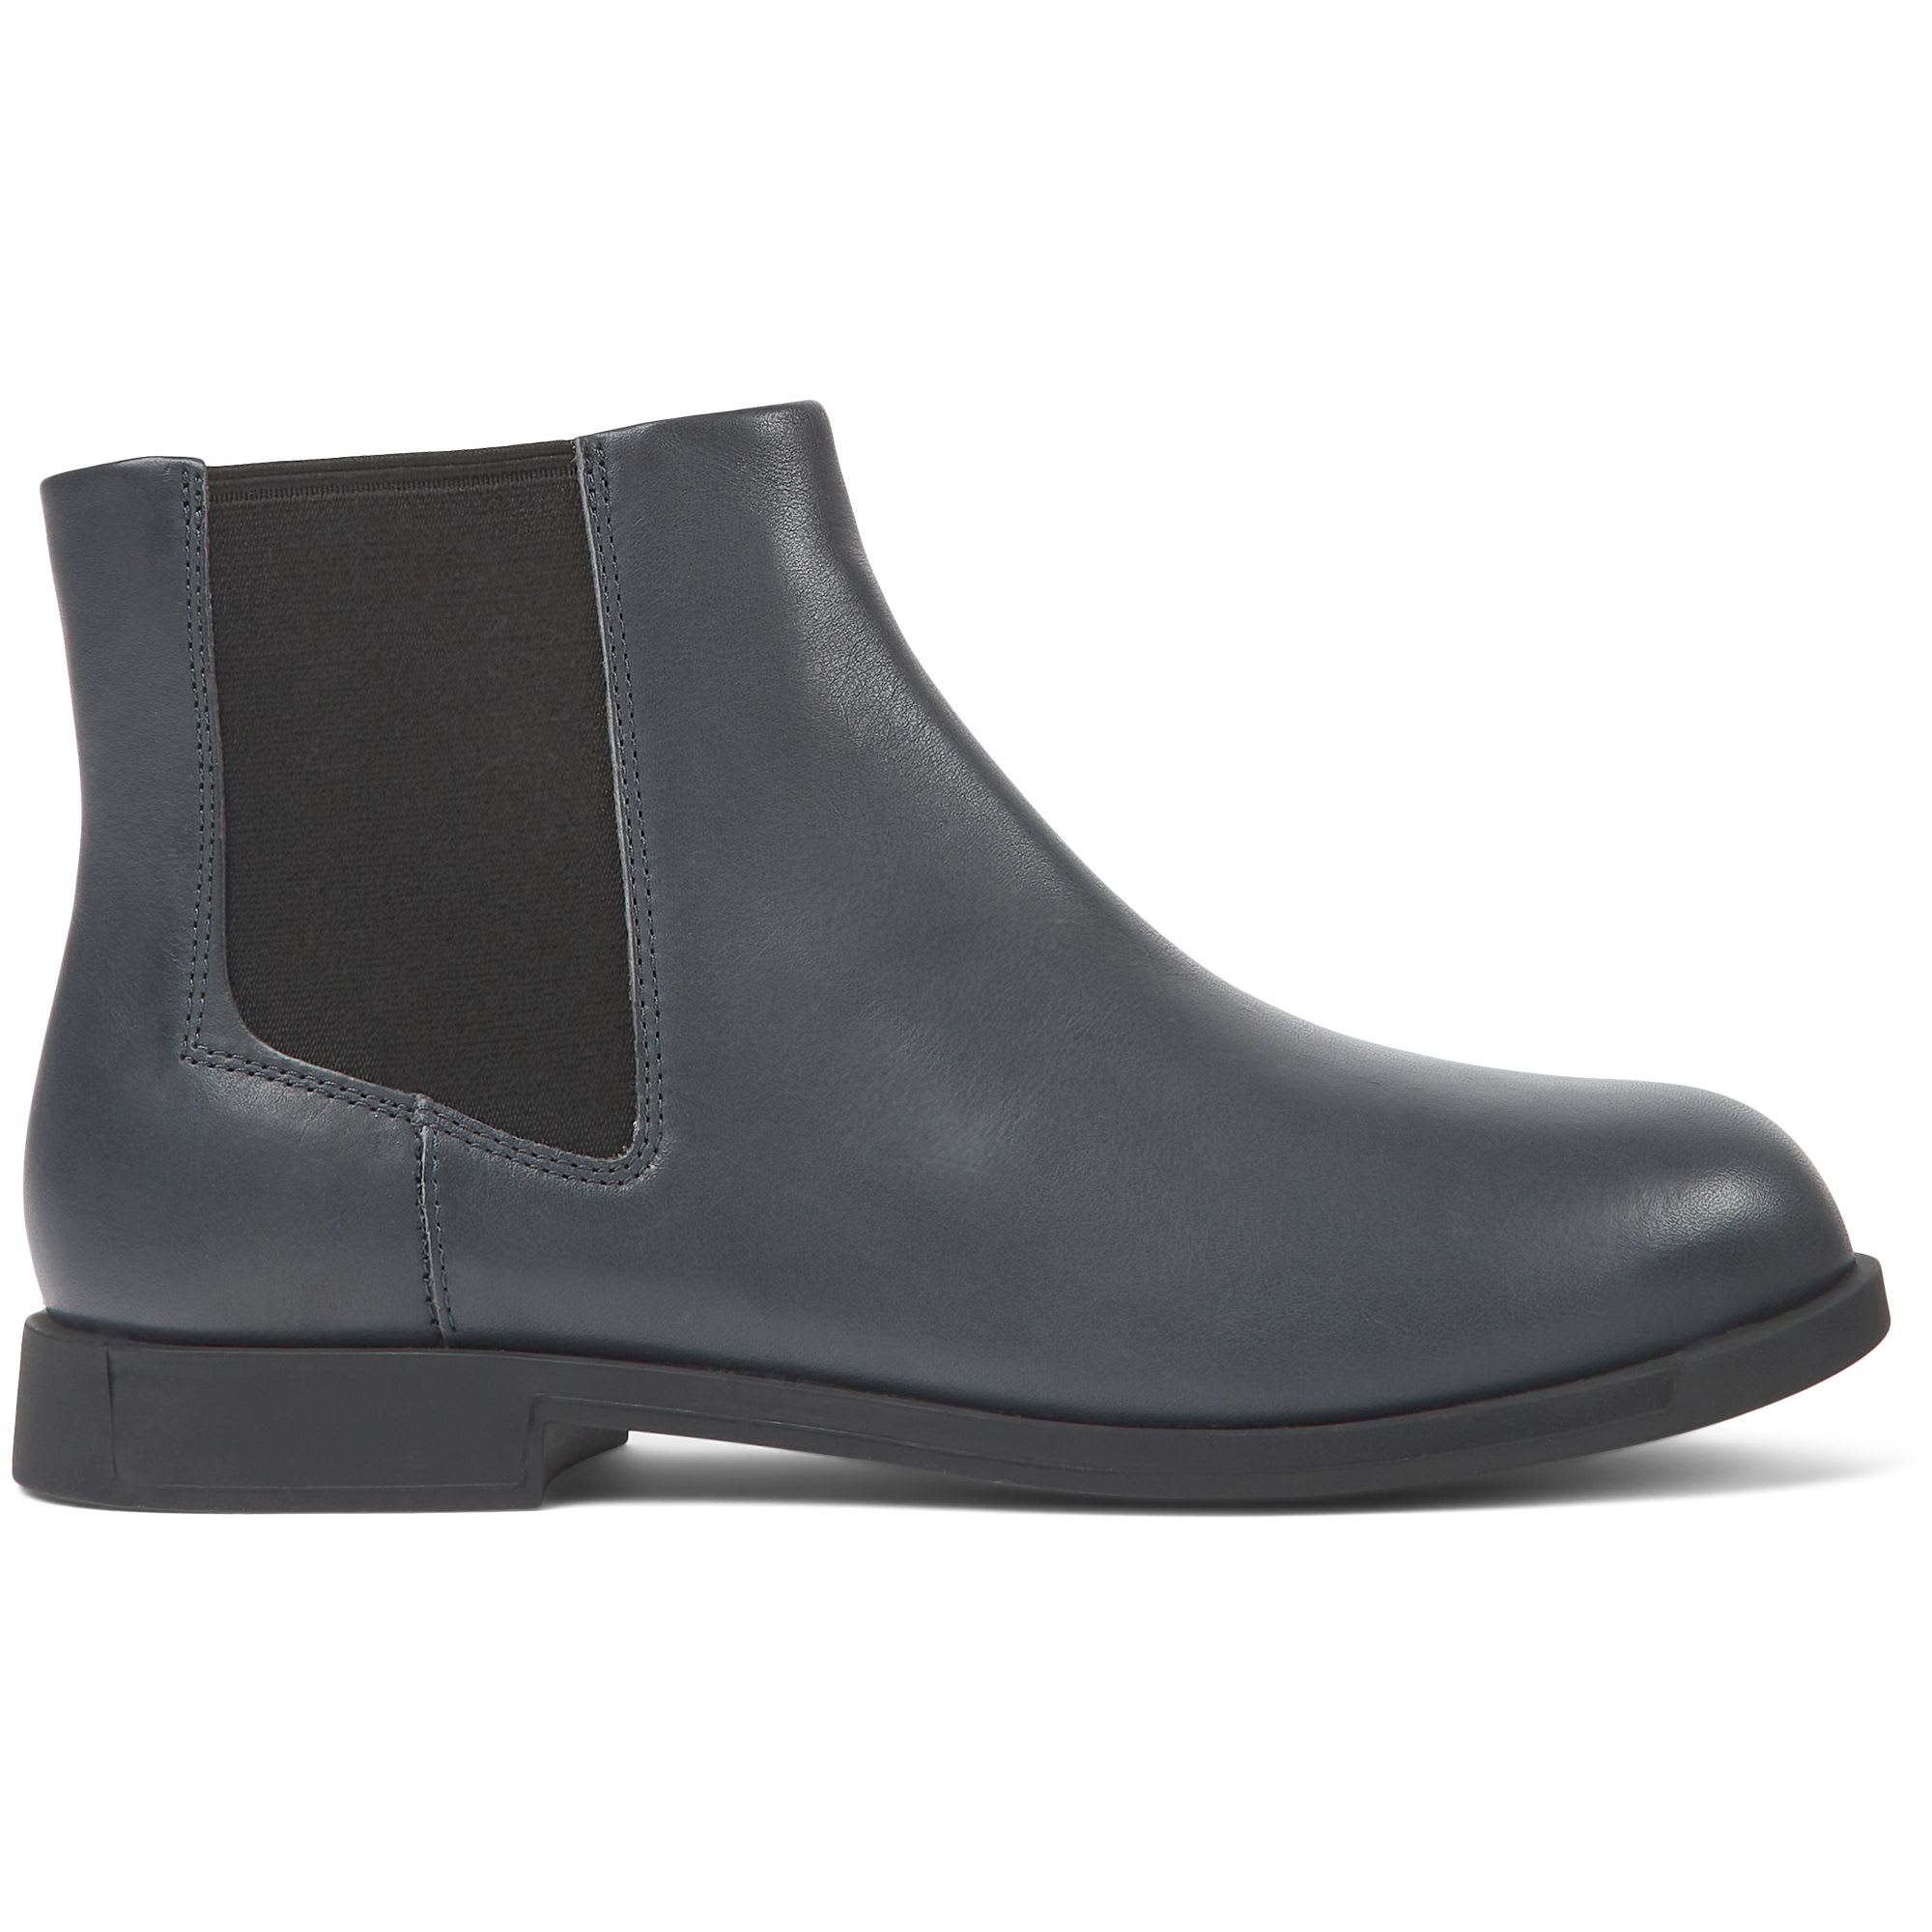 Ankle Boots Bowie, grey